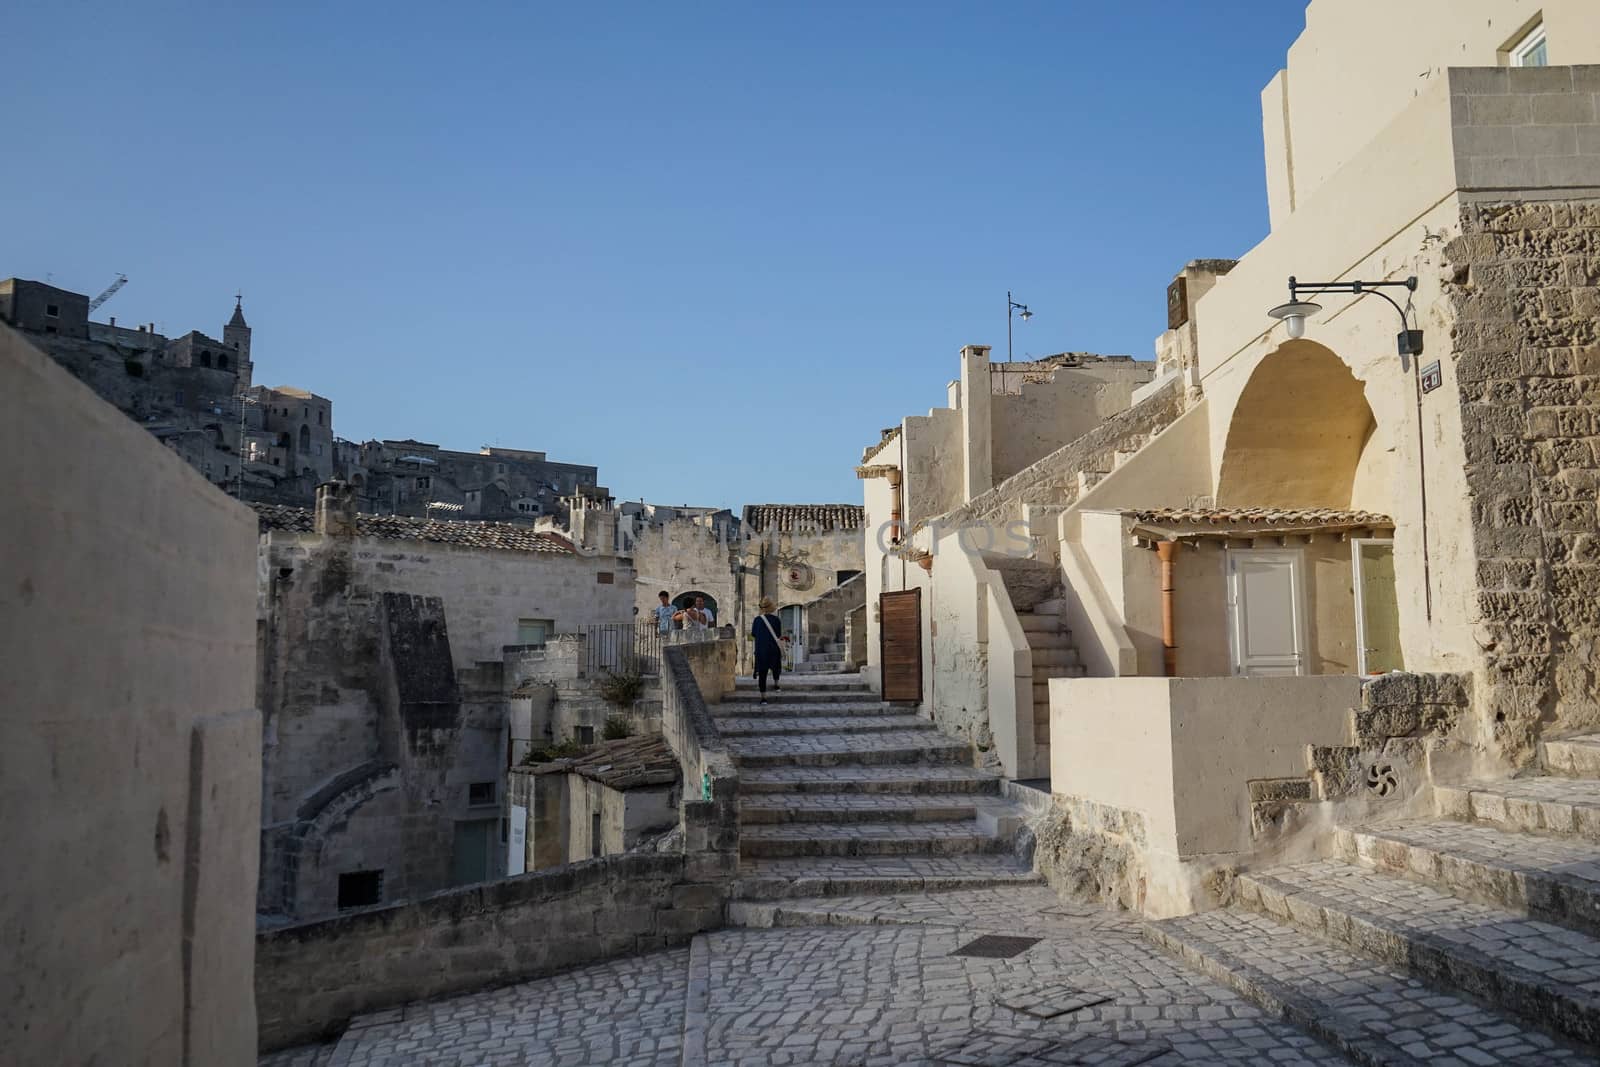 Residences at the Sassi of Matera by cosca